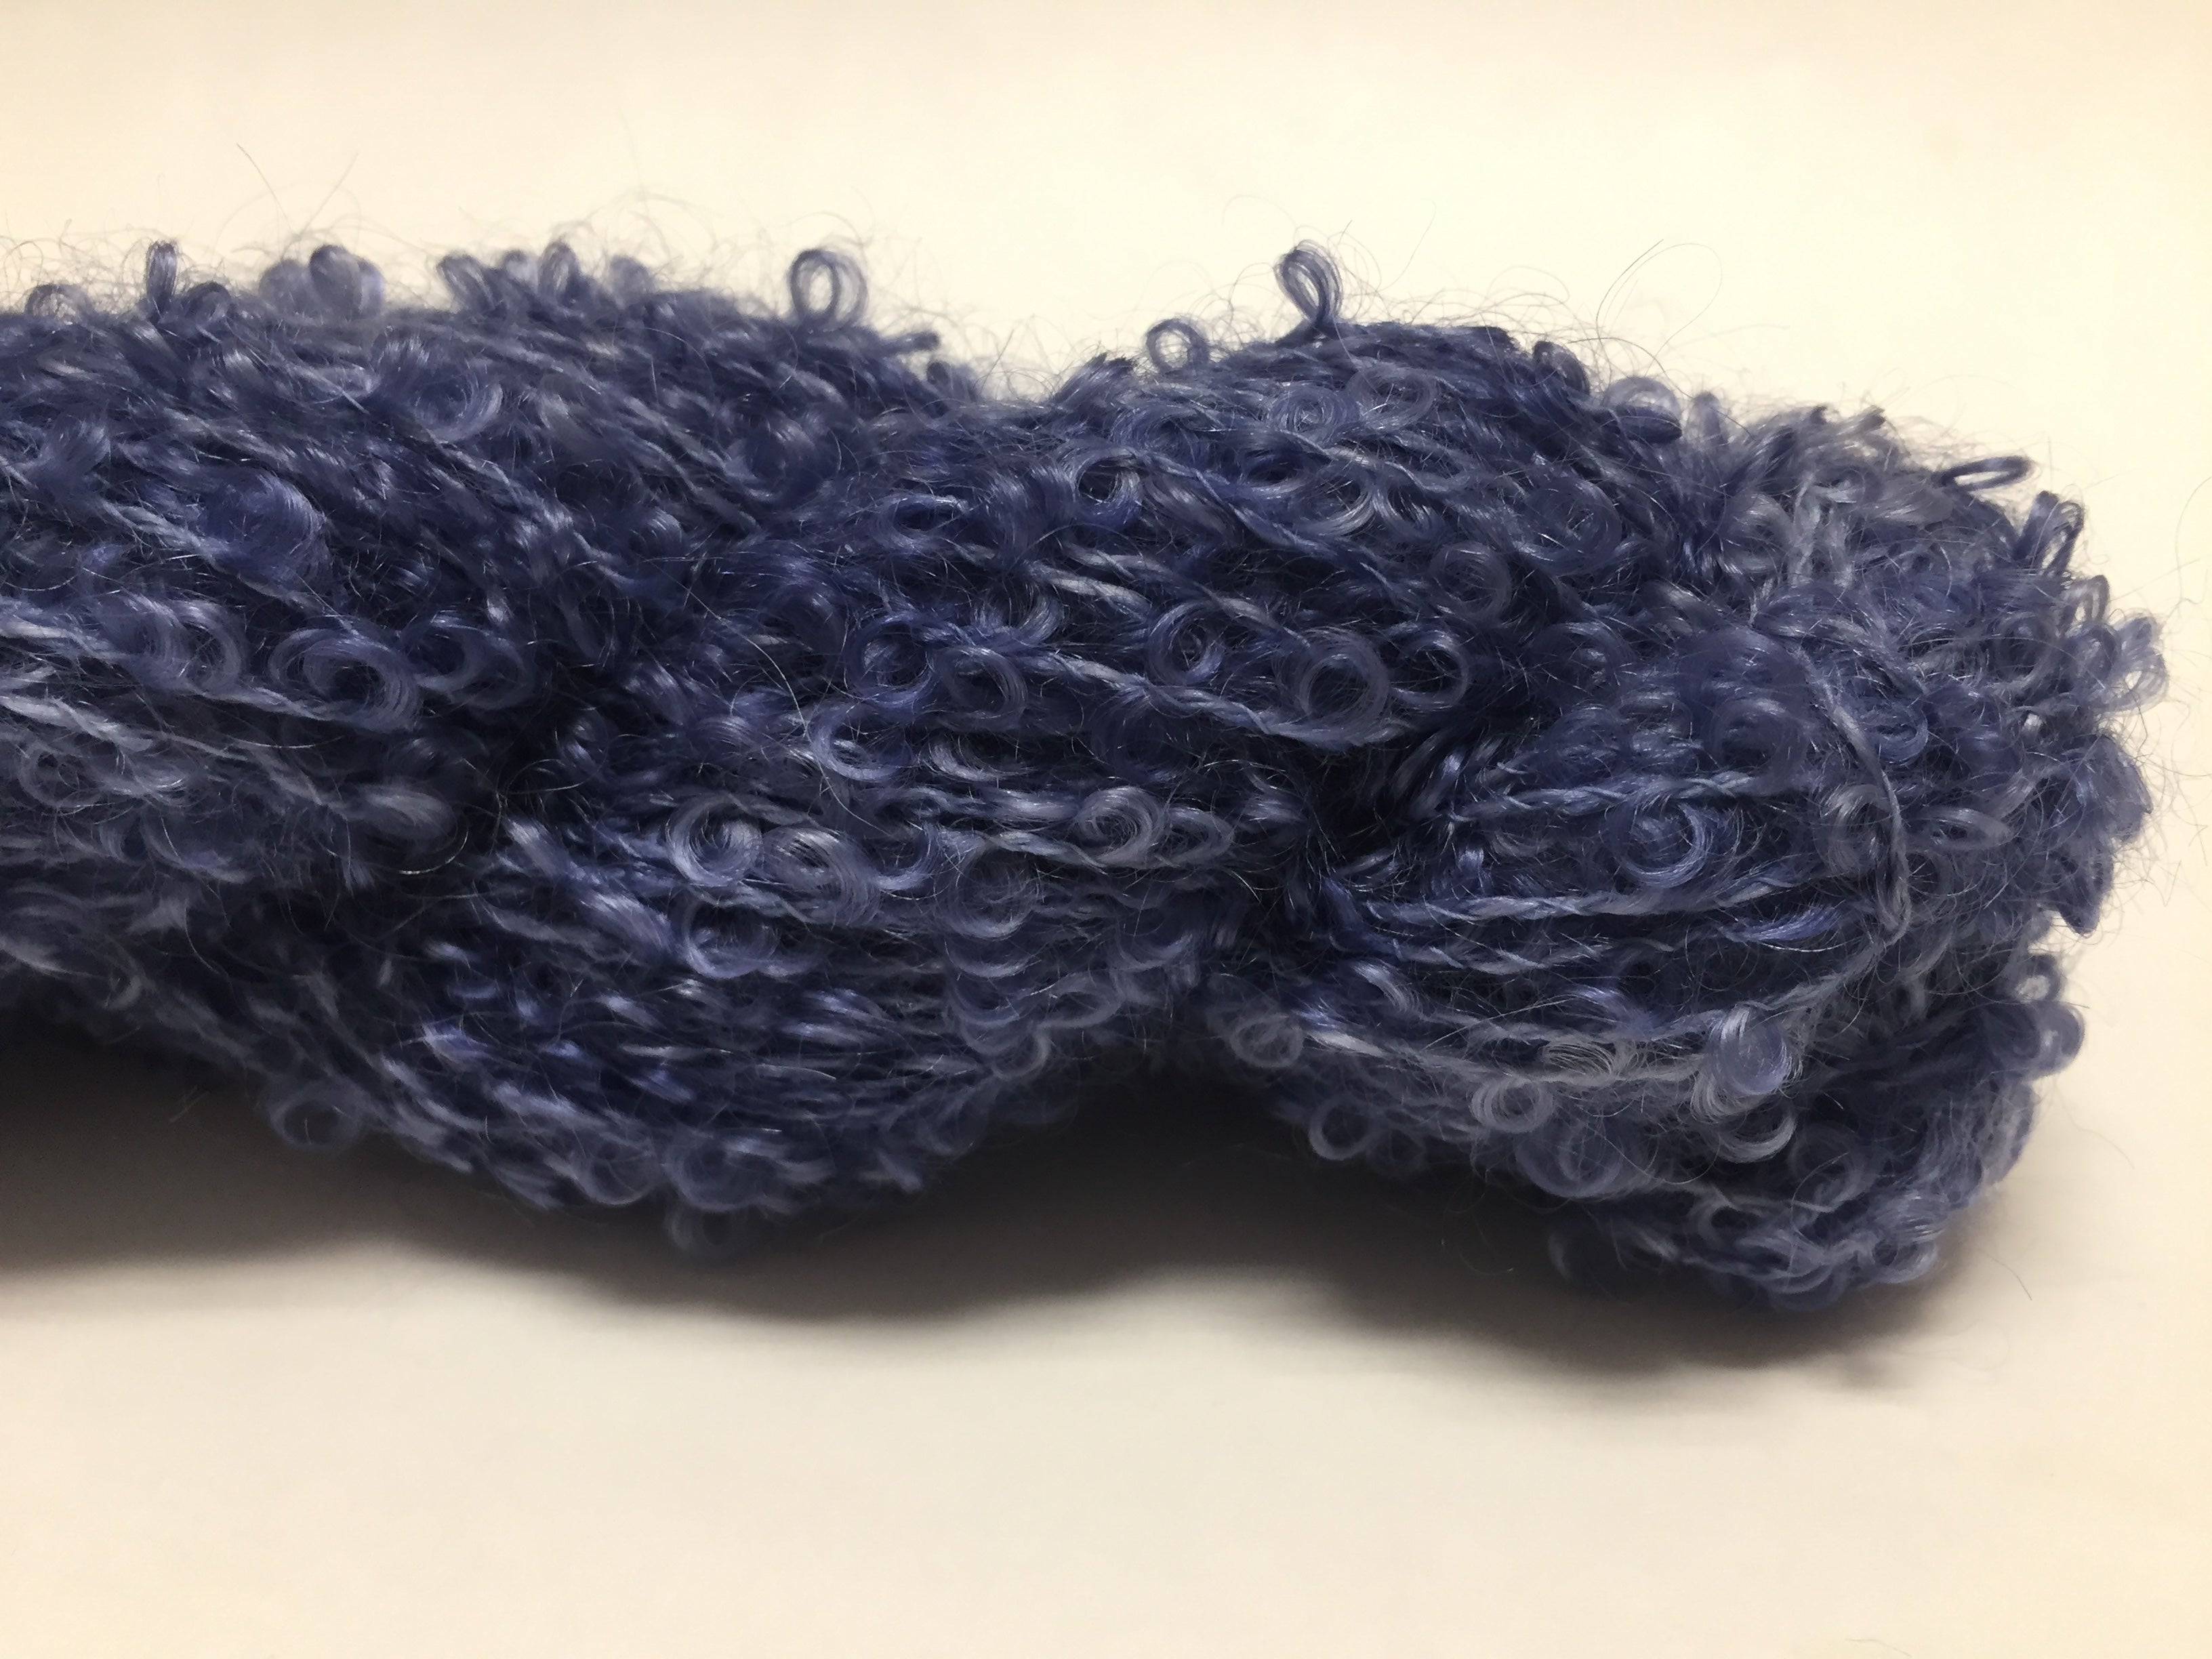 Soft Boucle - d - Yarn Junction Co